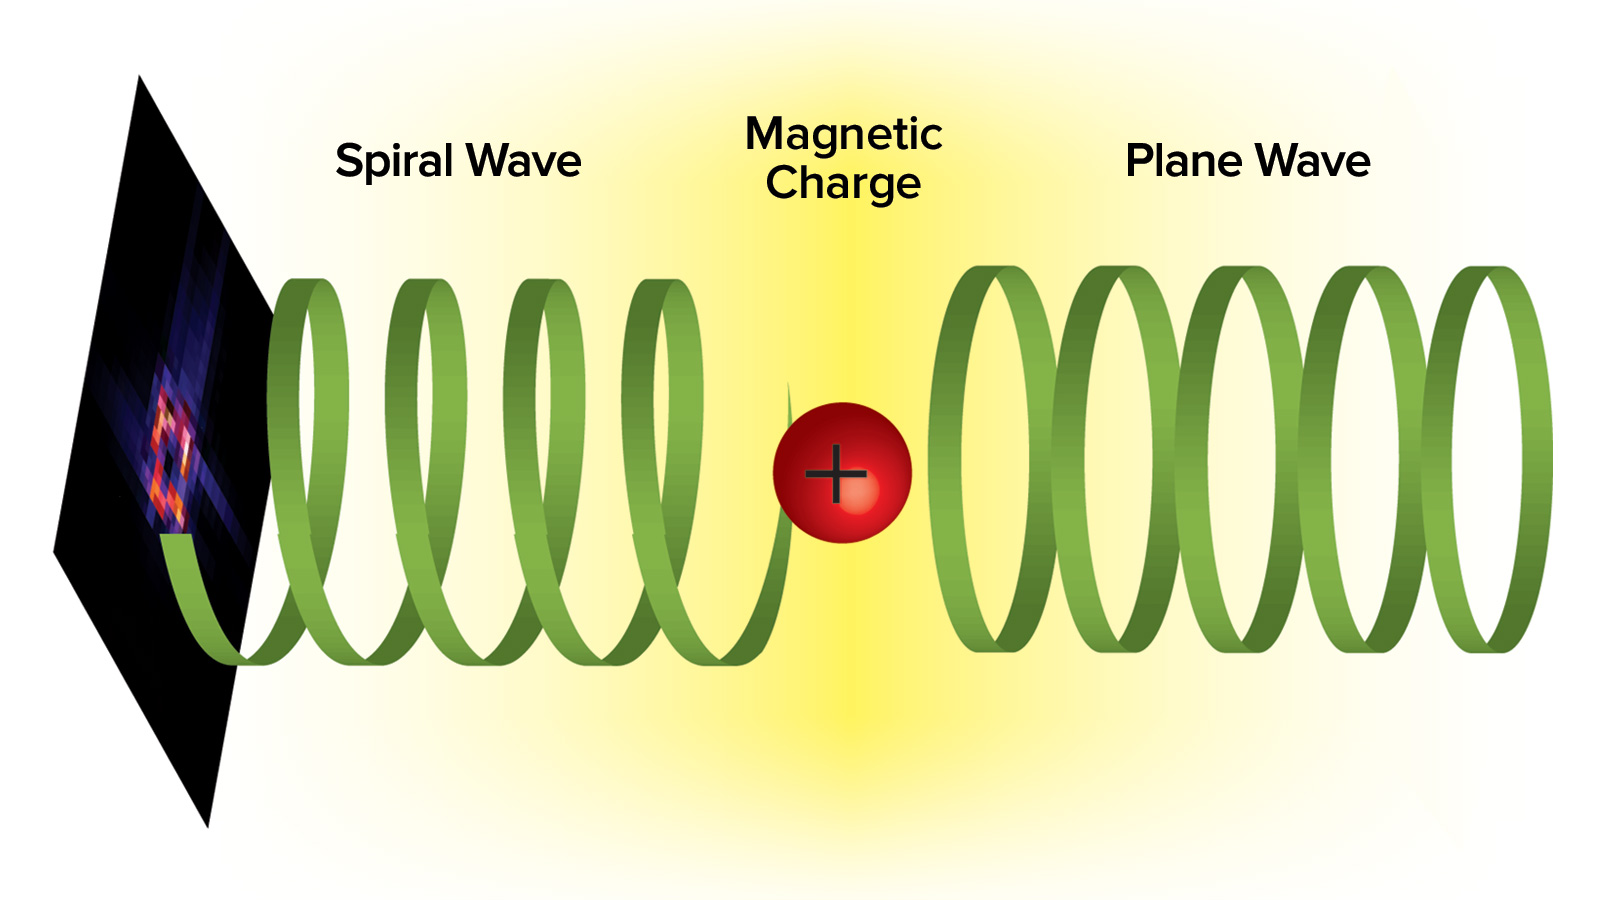 This shows how a plane electron wave and a magnetic charge interact, forming an electron vortex state that carries orbital angular momentum. (Image by Argonne National Laboratory.)